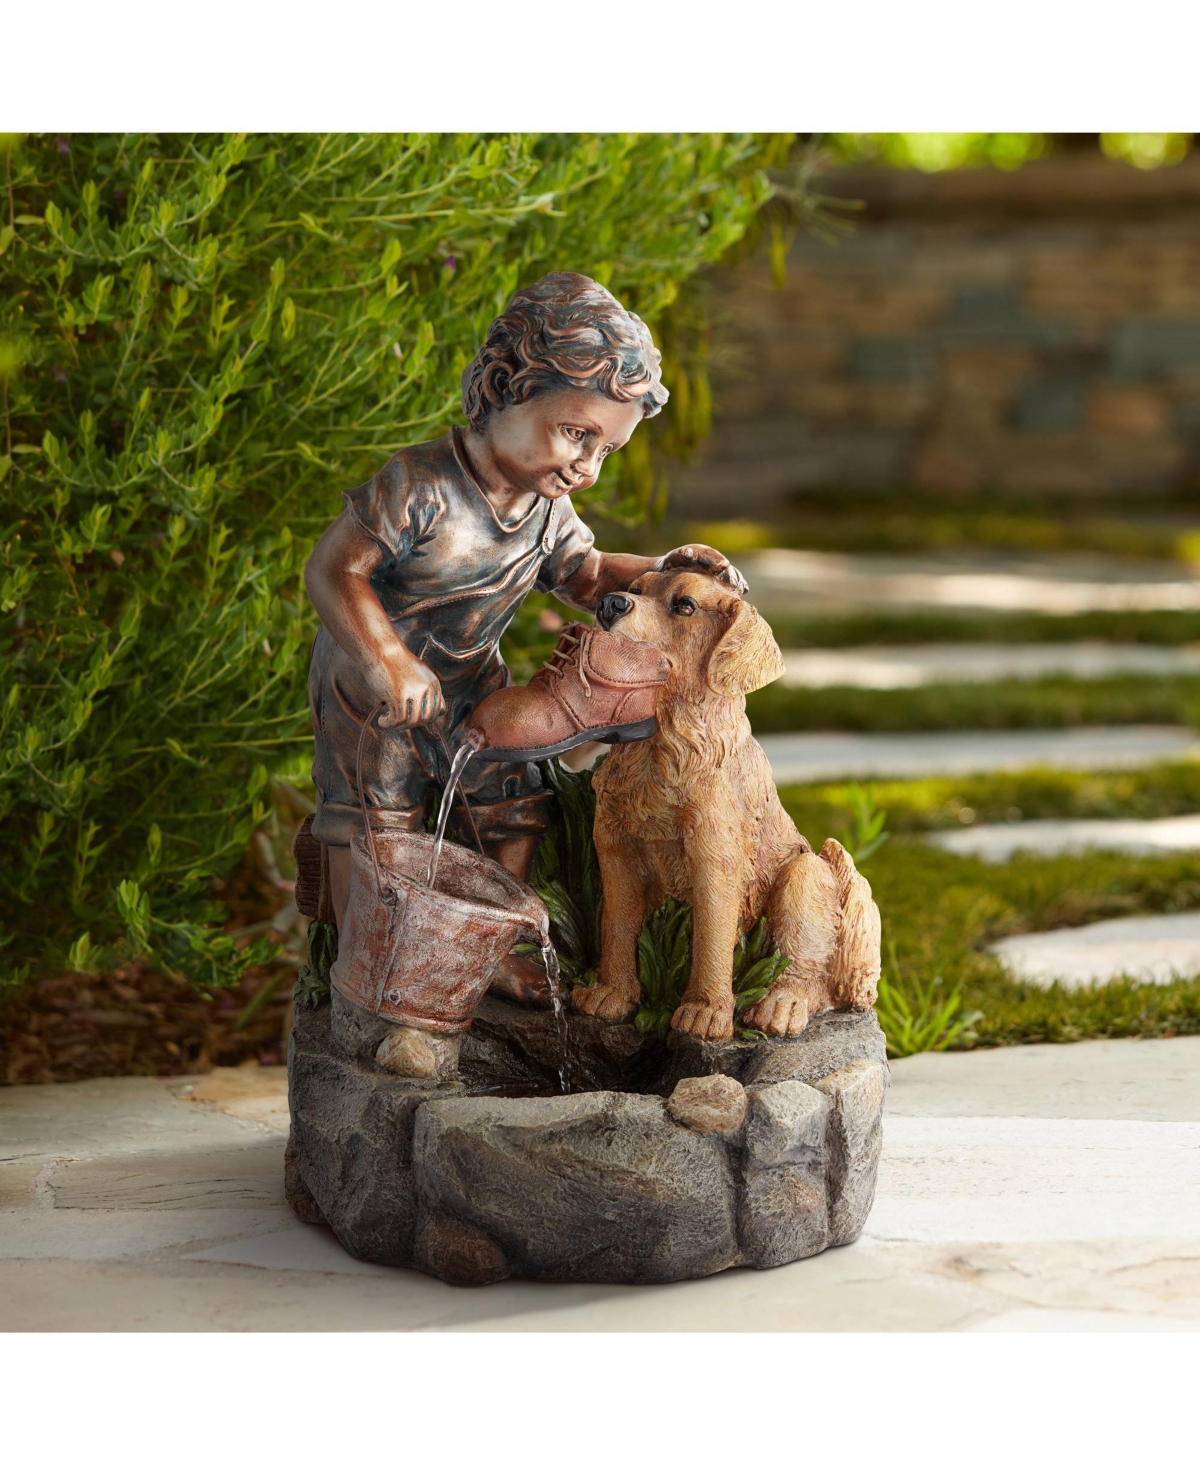 Northport Modern Boy Plays with Dog Outdoor Floor Water Fountain 24 3/4" High Modern for Garden Backyard Patio Porch Home Bedroom House Living Room Re